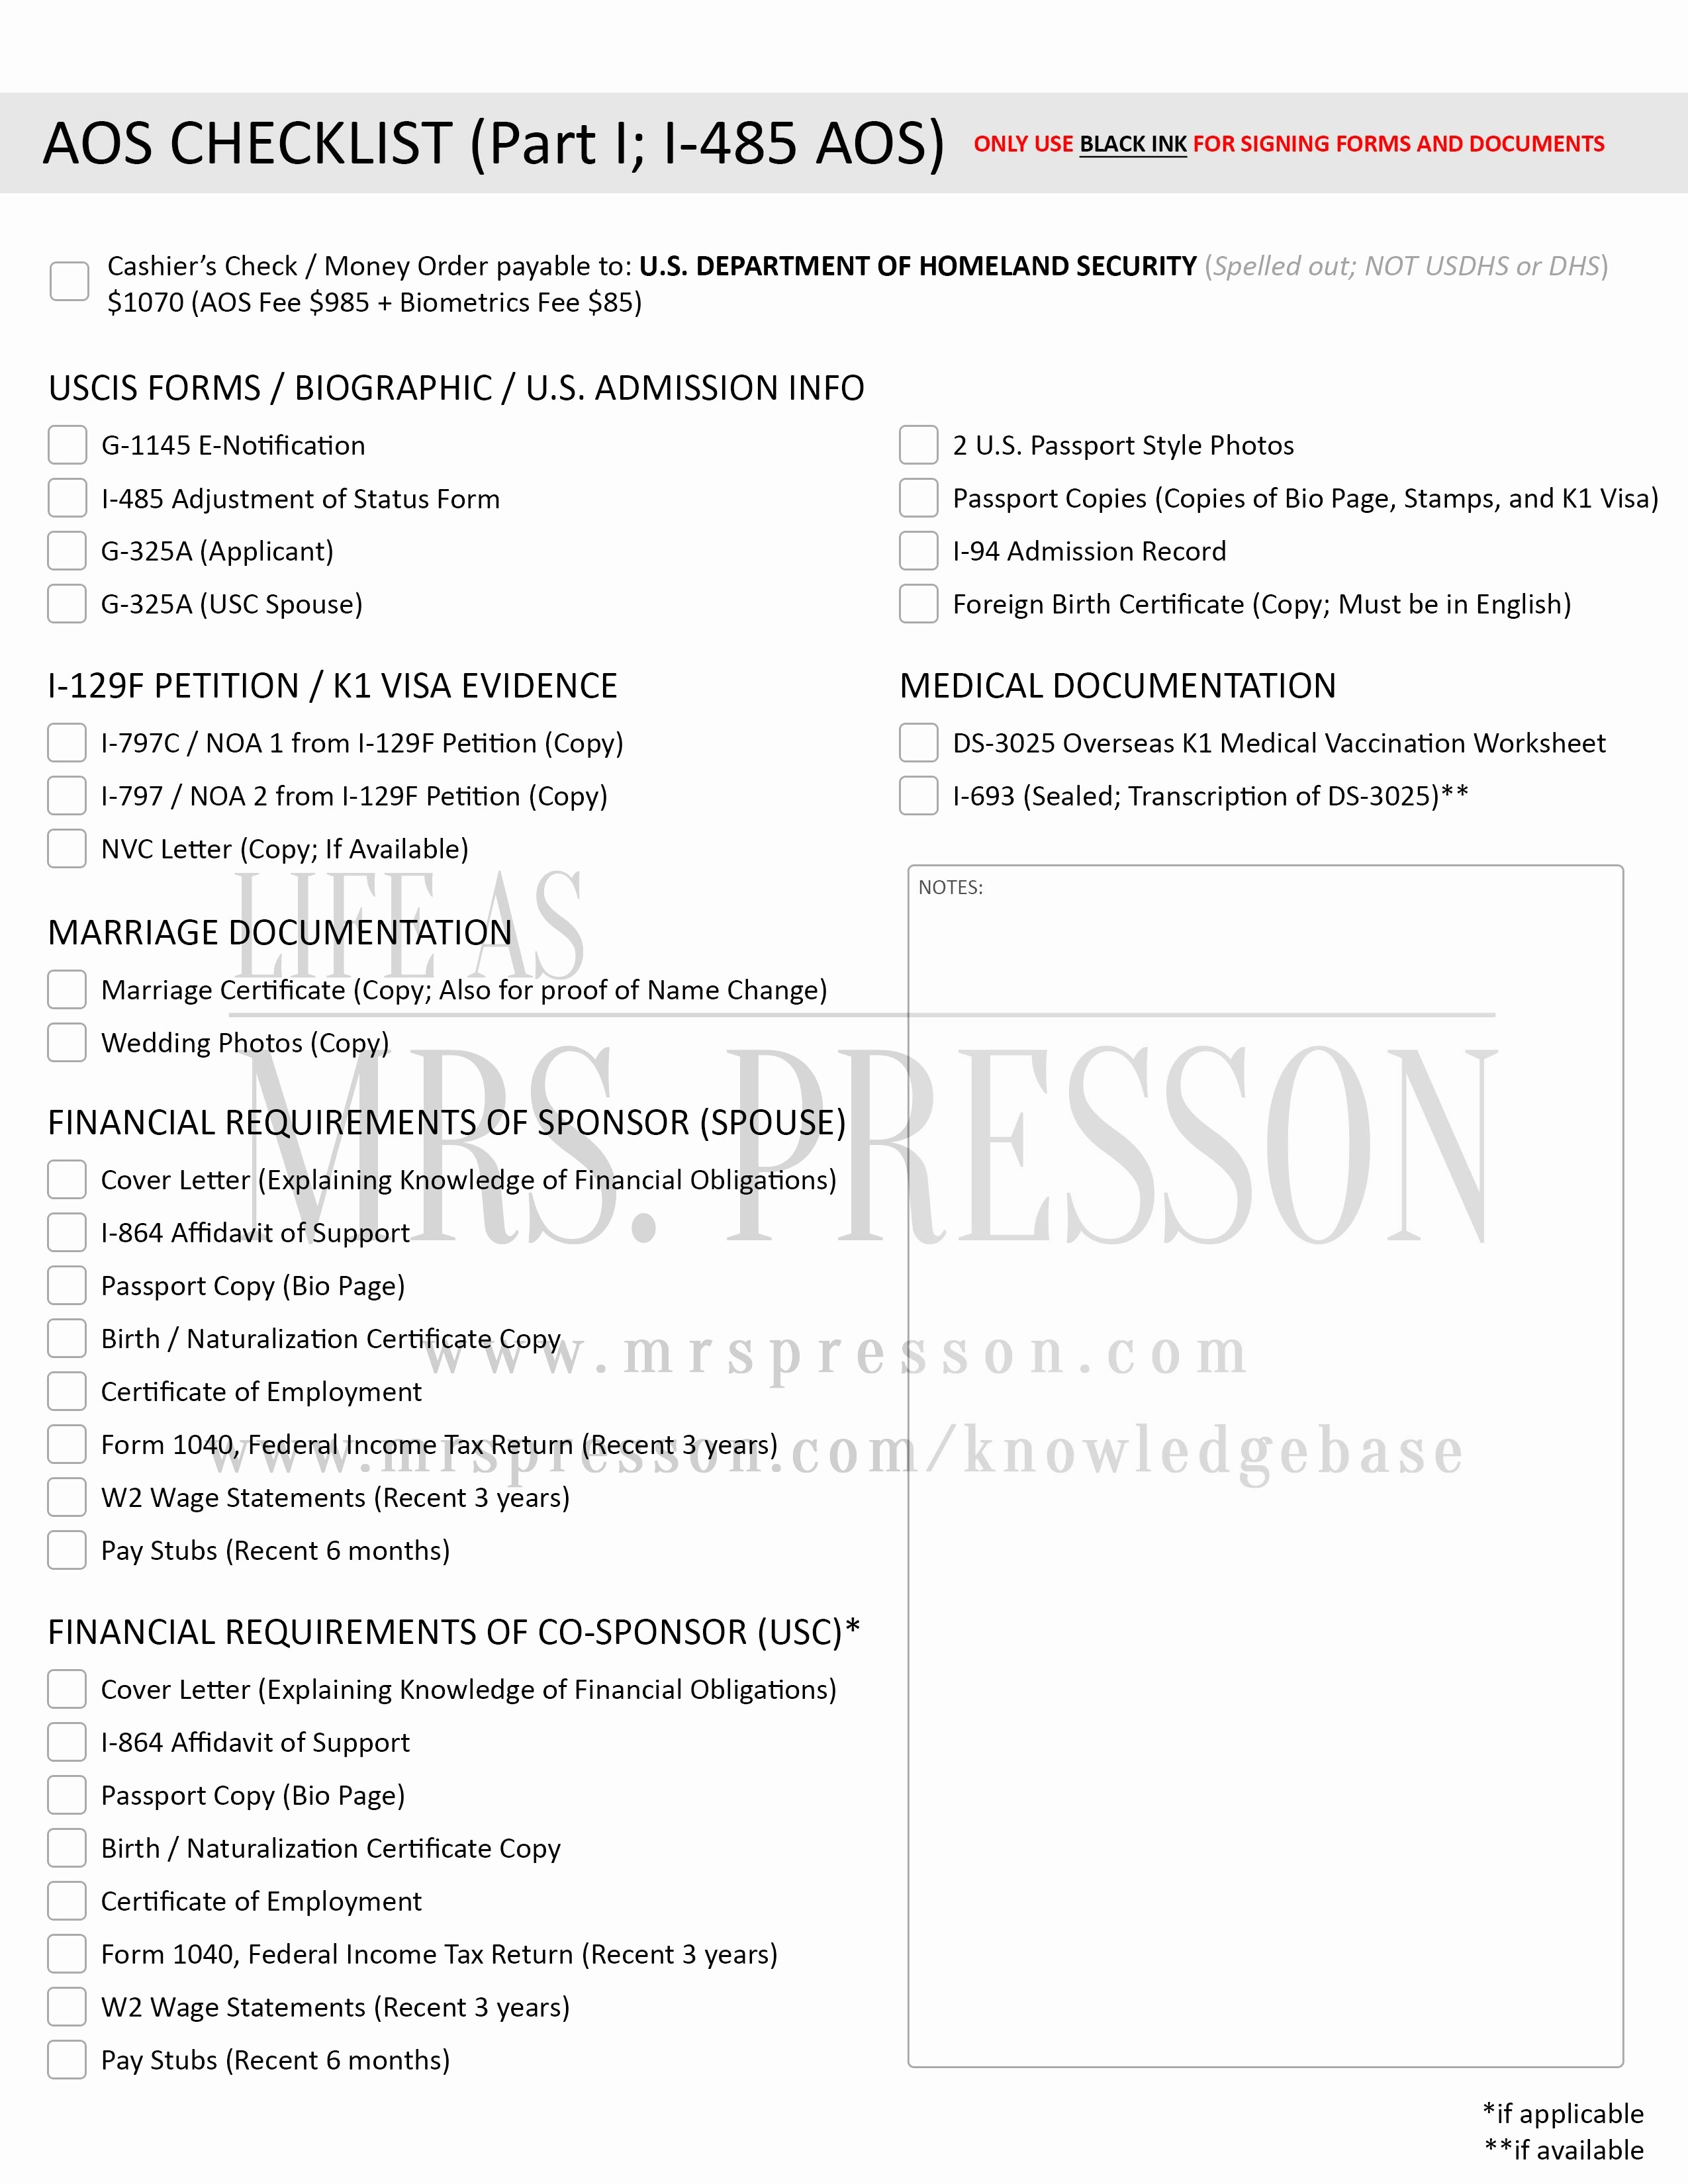 Irrevocable Letter Of Credit Template - Sample Beneficiary Certificate Letter Credit Fresh Affidavit